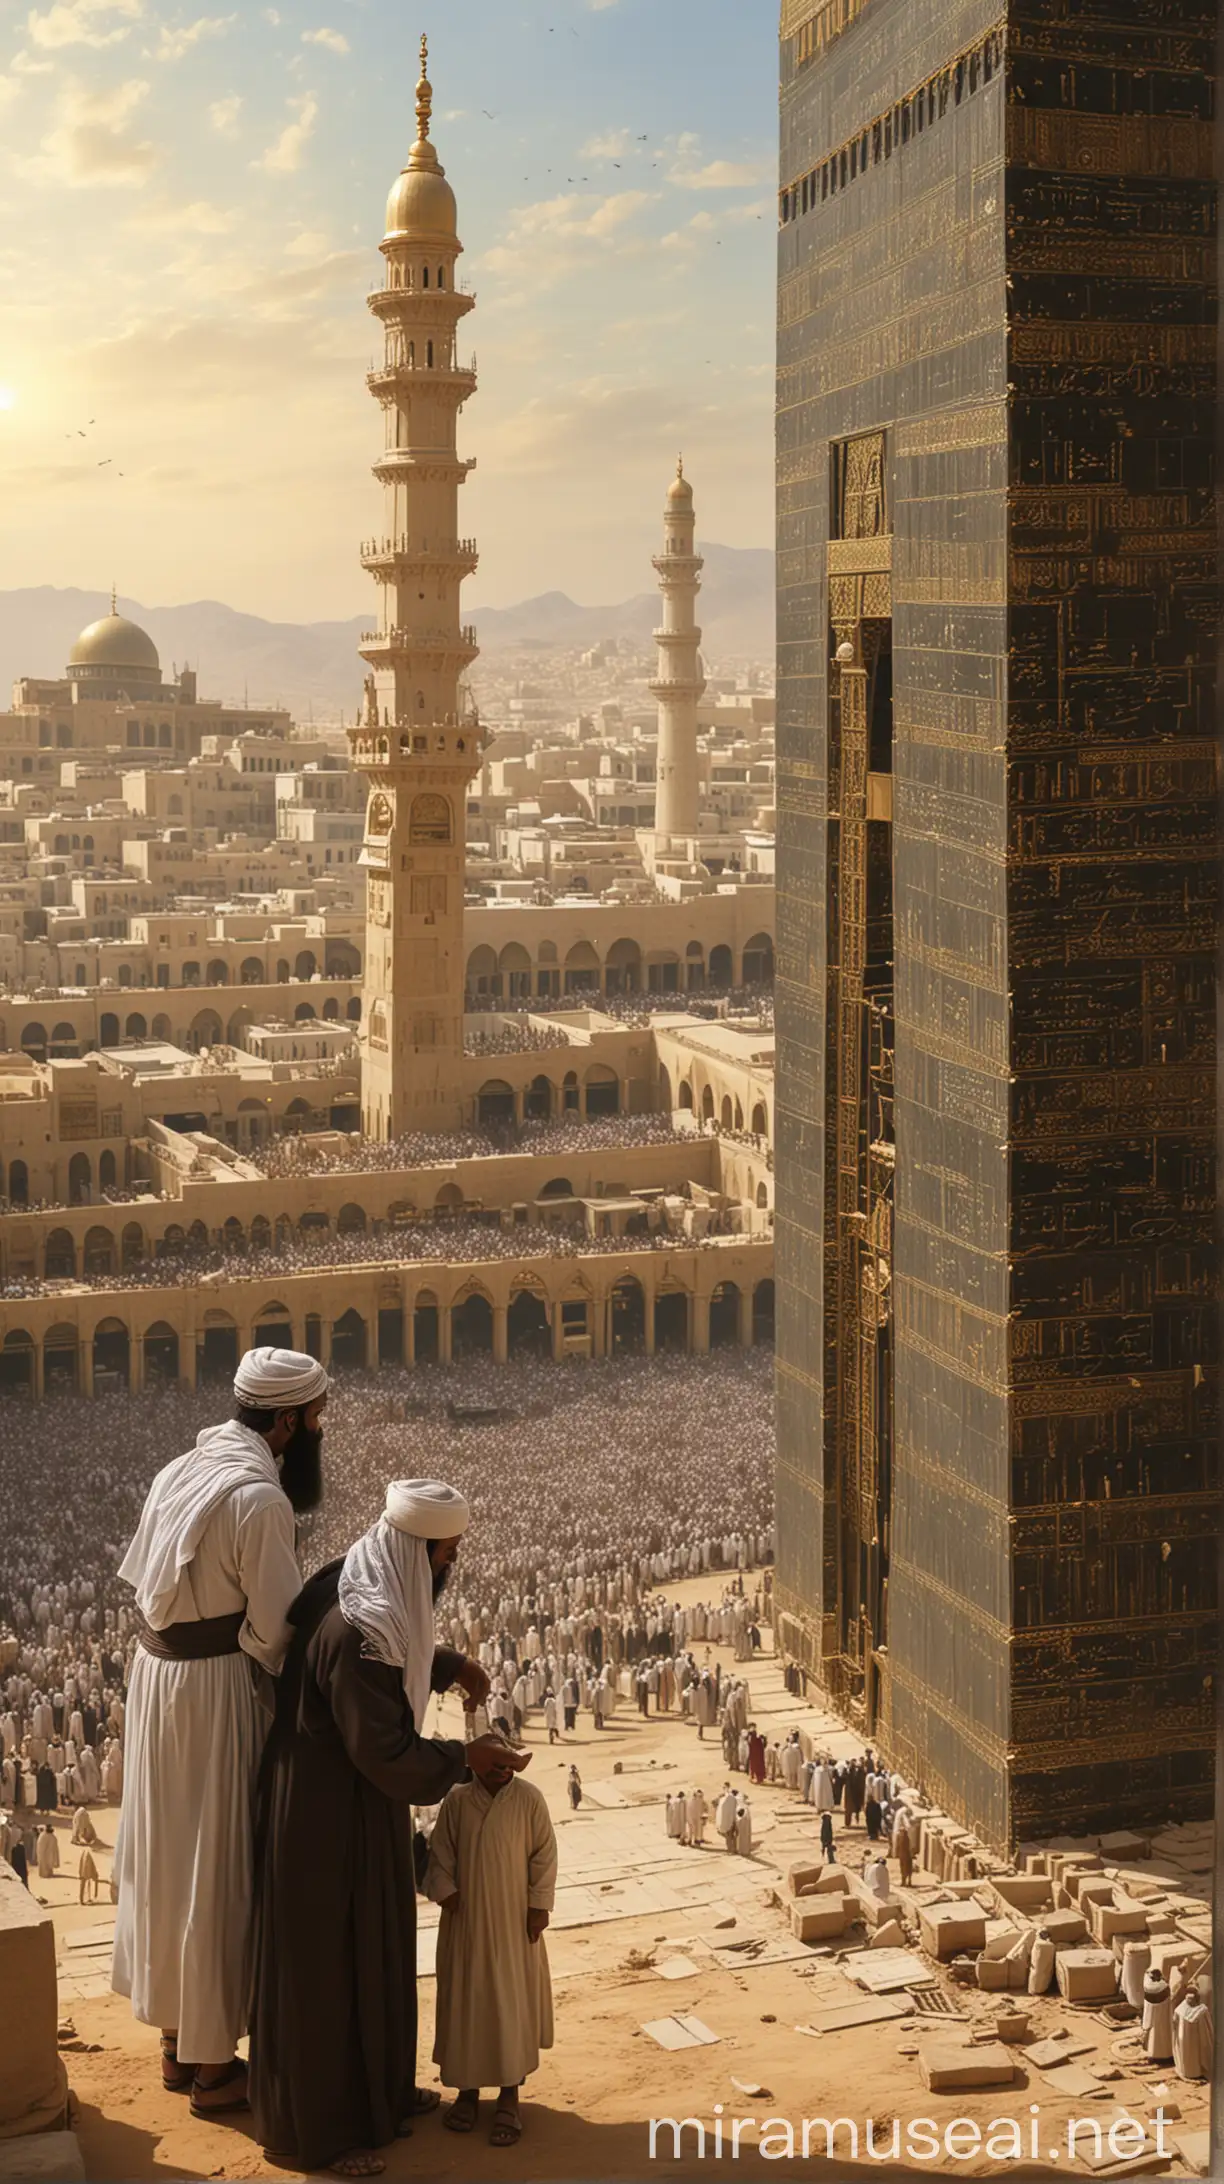 Divine Reconstruction: Depict Prophet Ibrahim (Abraham) and Isma'il (Ishmael) rebuilding the Kaaba under Allah's command. Capture the father and son working together to raise the sacred walls of the Kaaba, symbolizing their obedience and faith.
